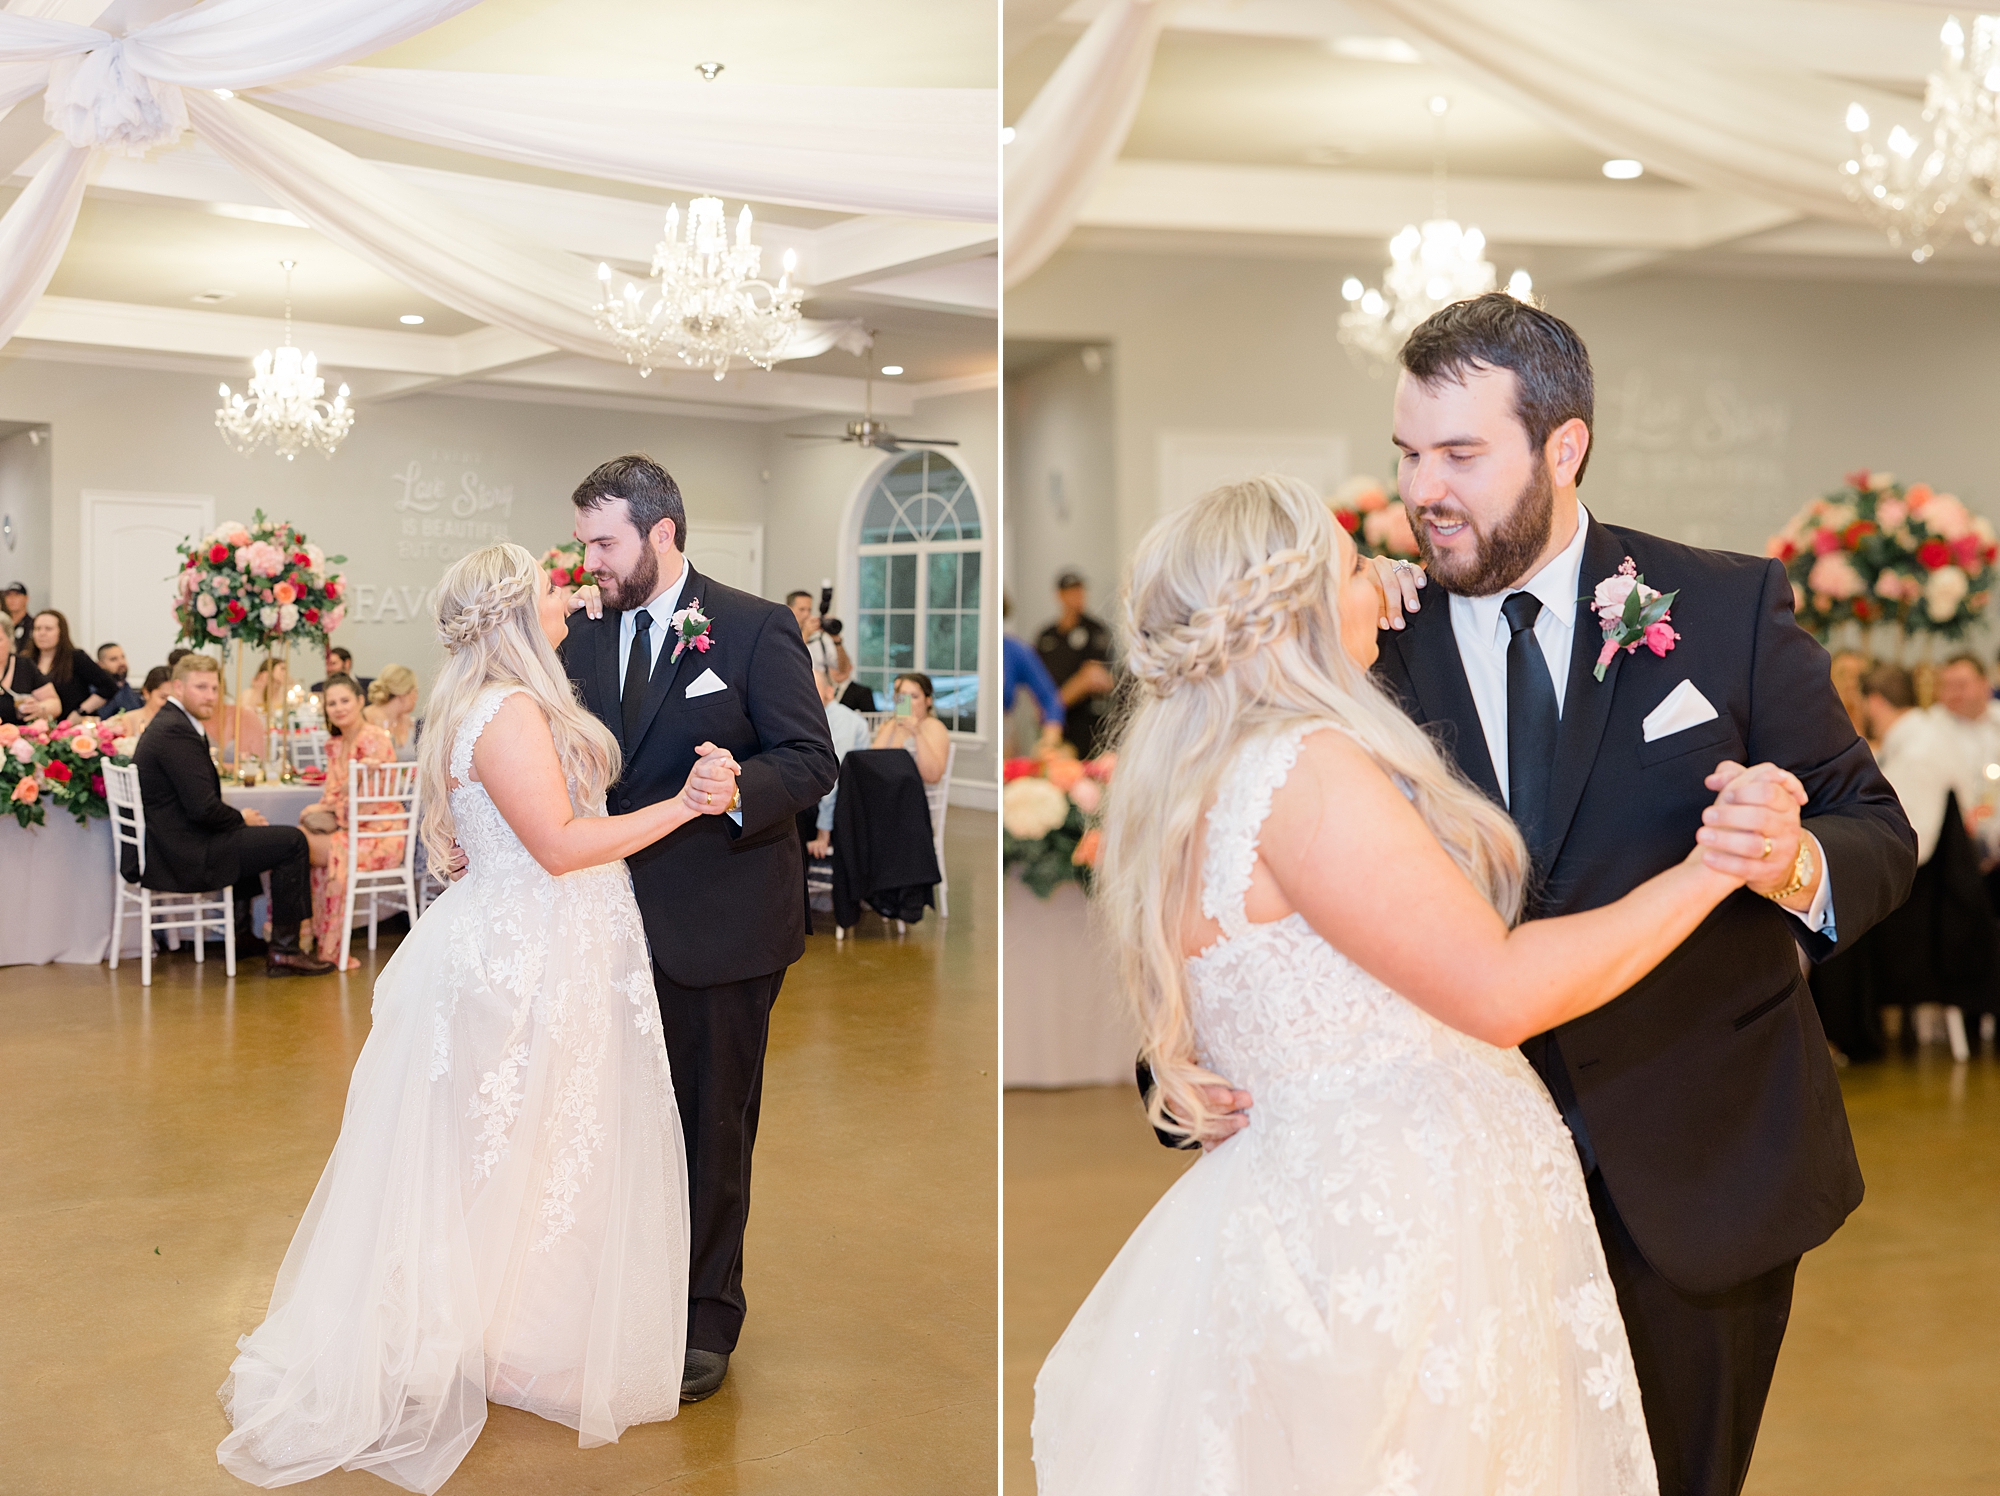 newlyweds have first dance during wedding reception